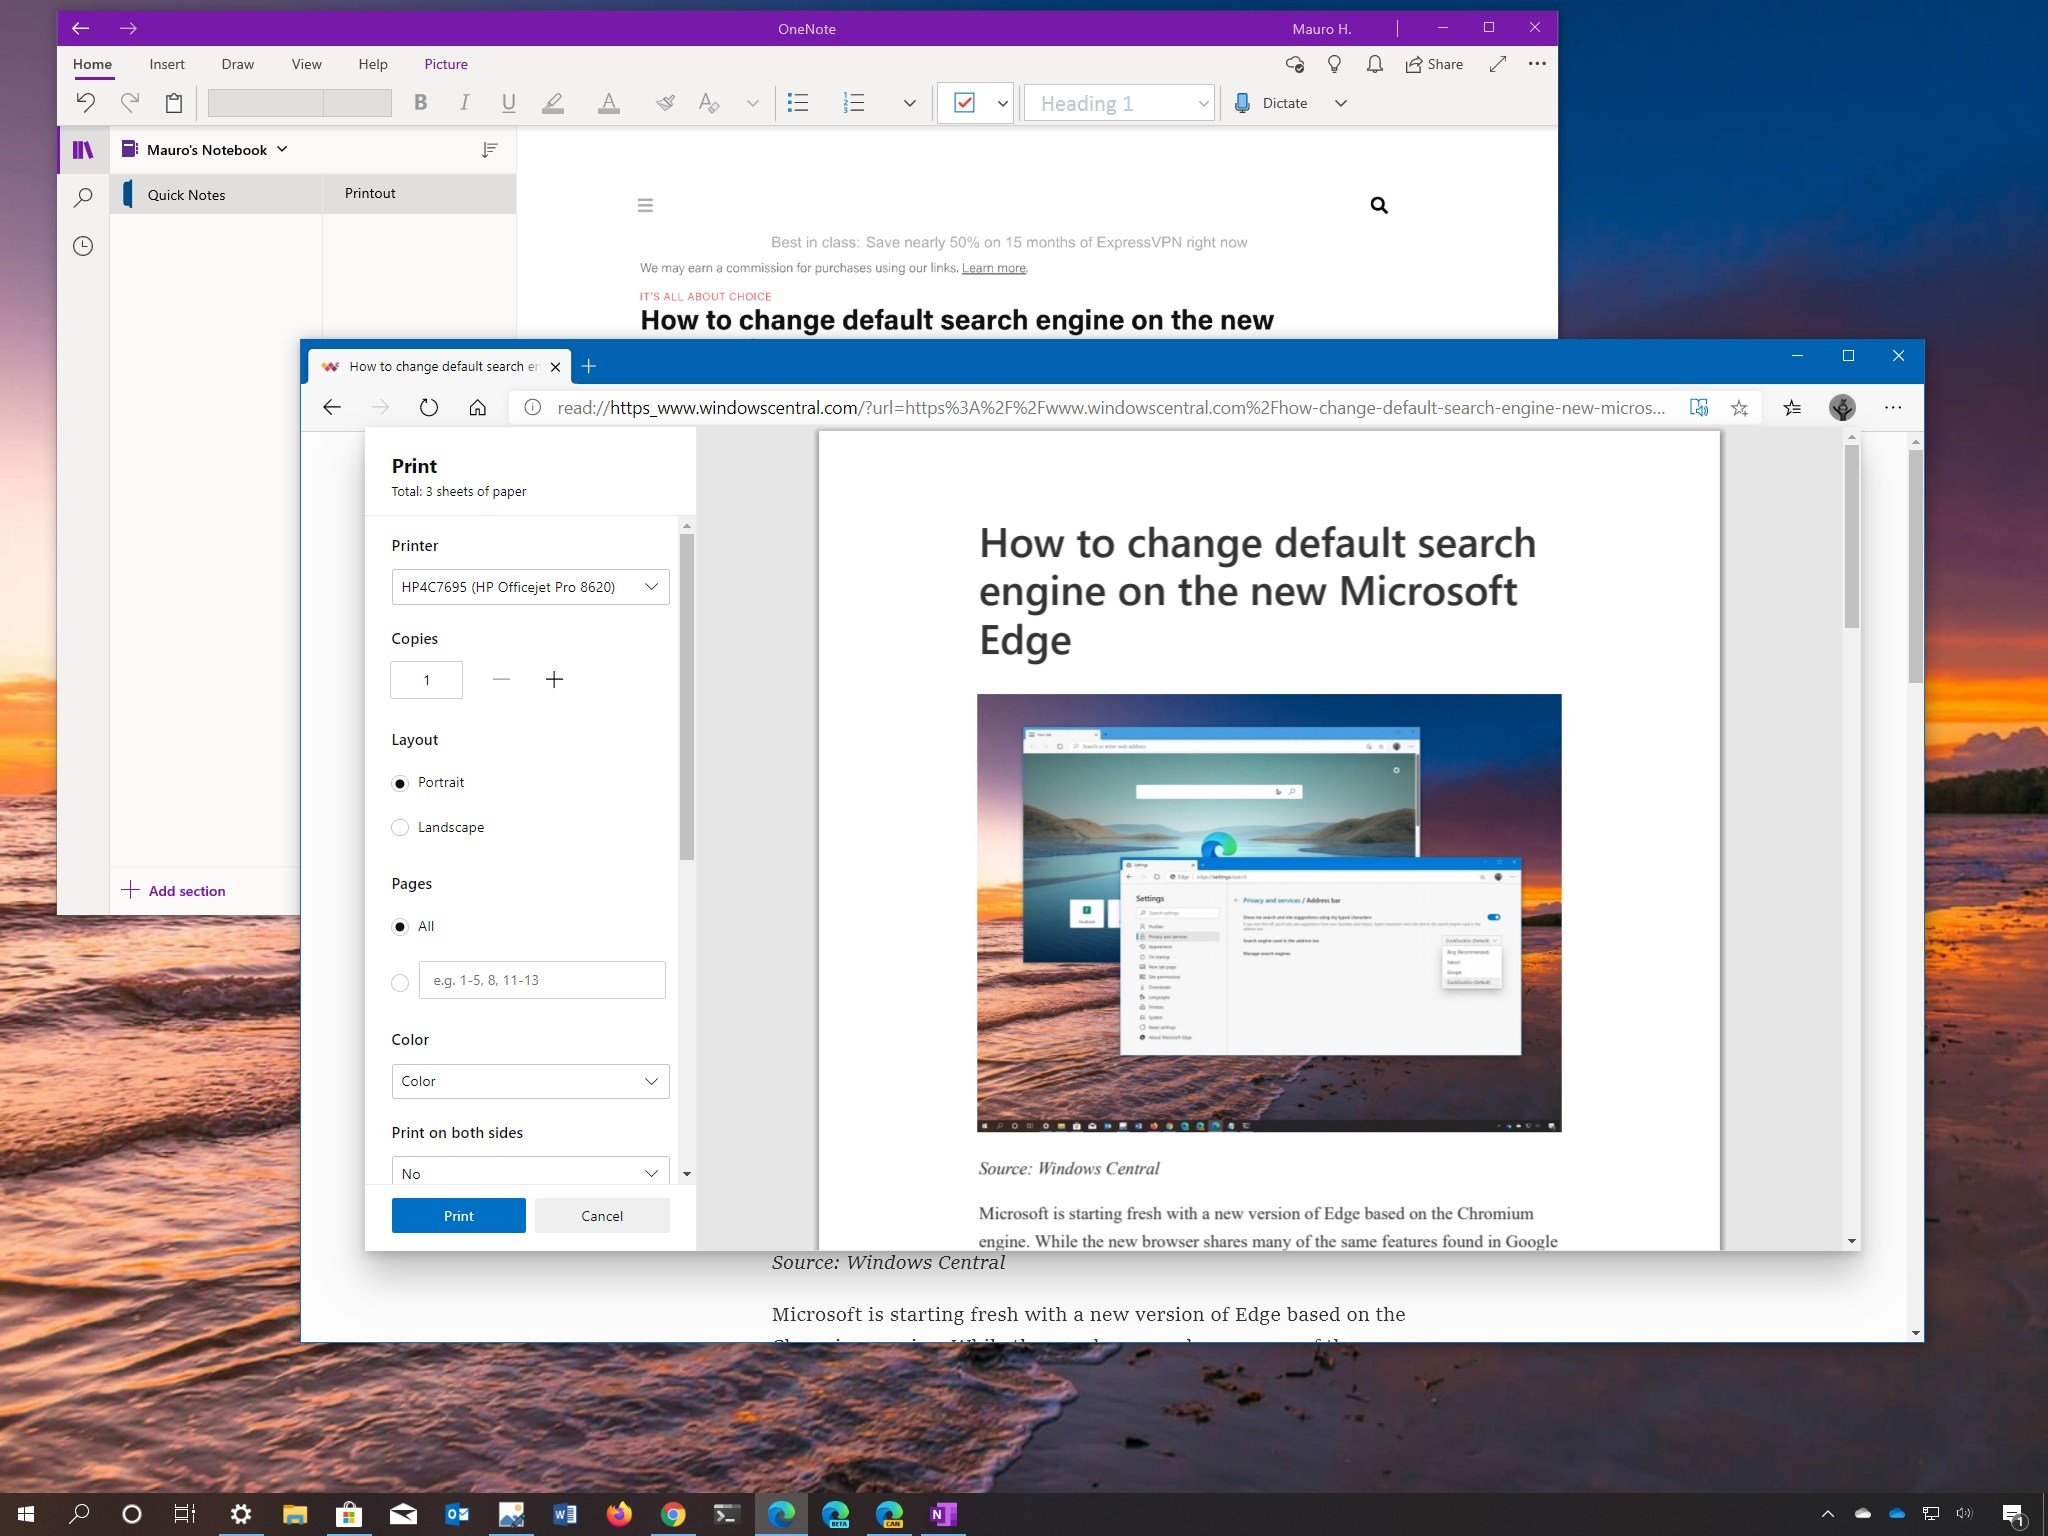 Edge browser feature sends images you view back to Microsoft